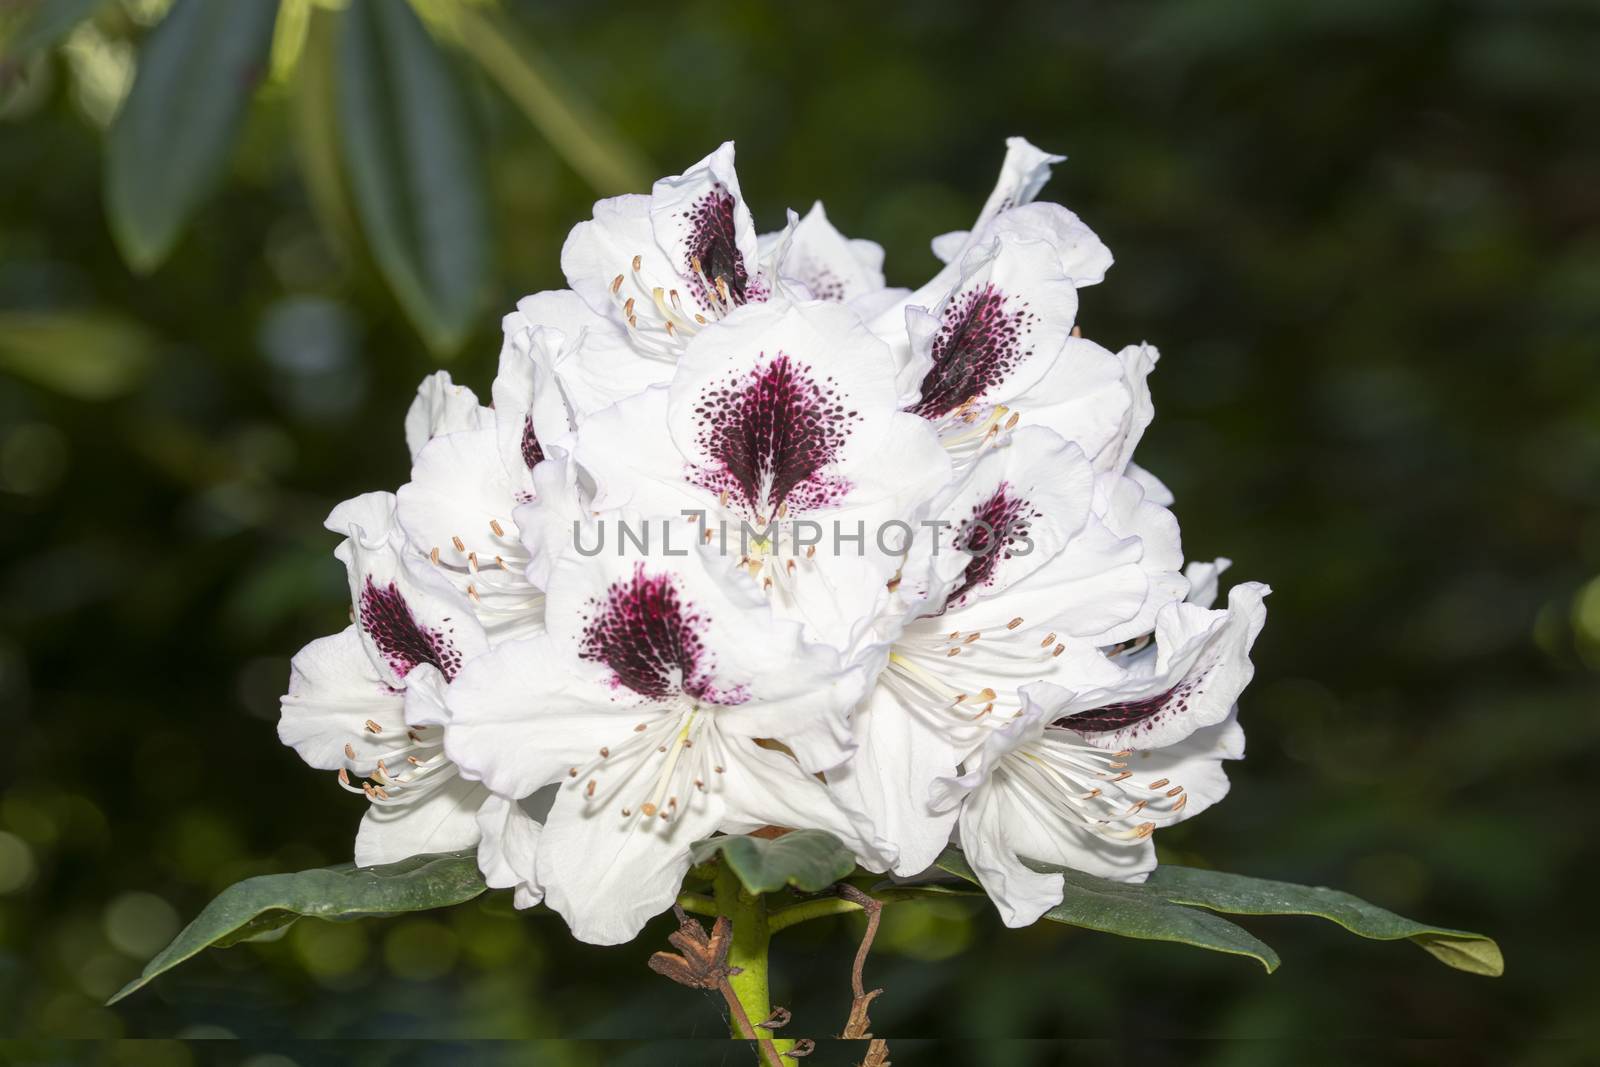 White and deep purple color rhododendron flower blossom under a bright spring day lights by ankorlight